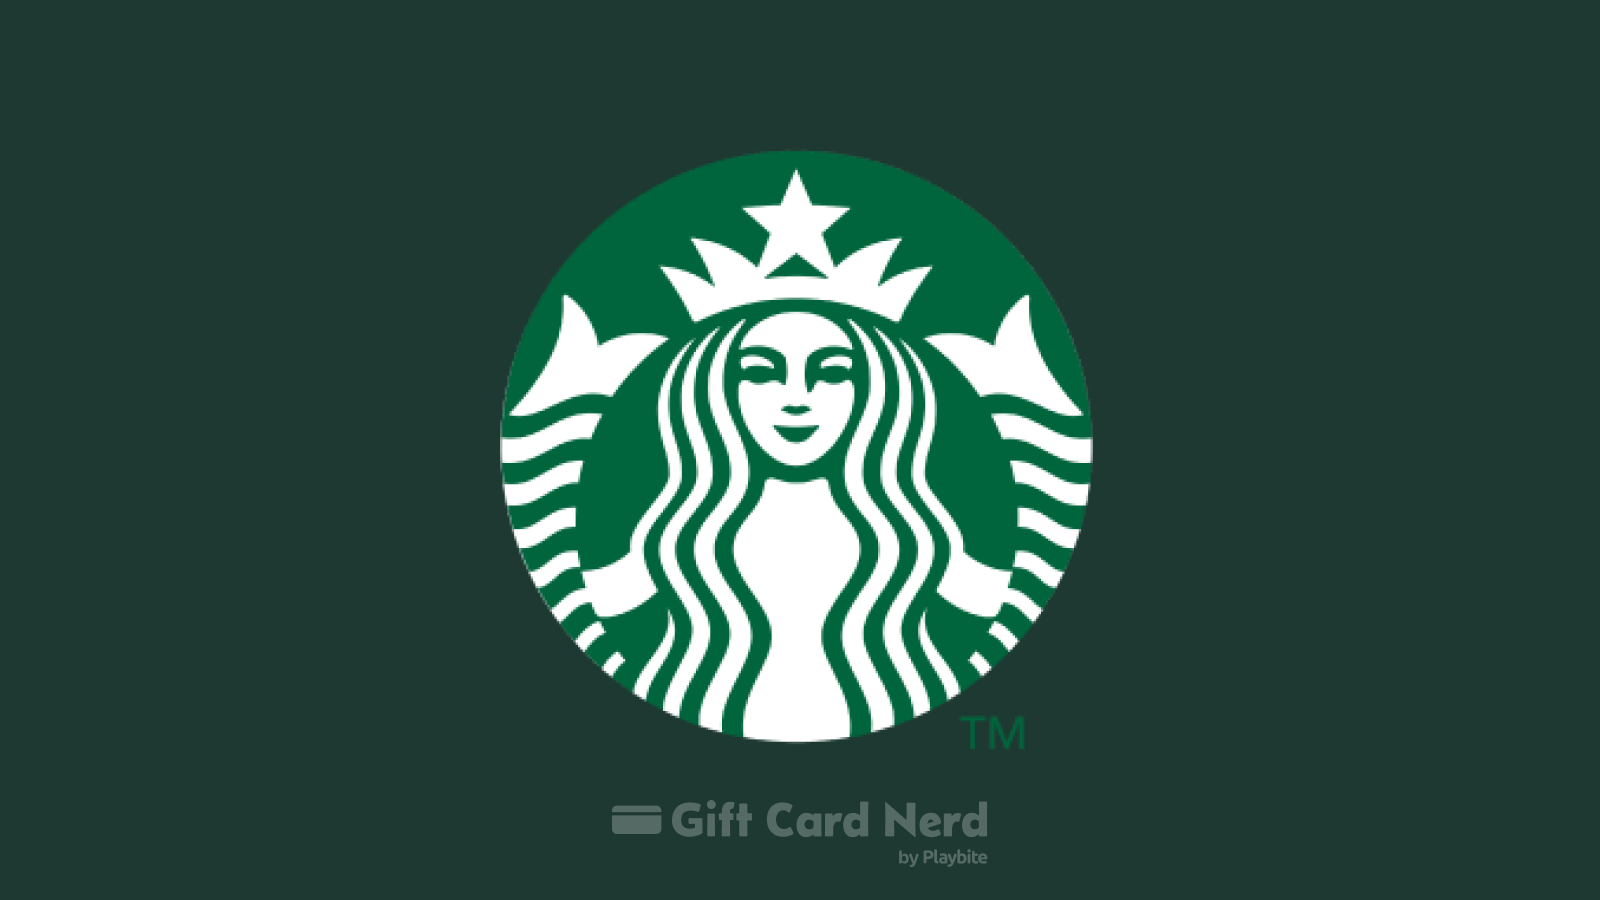 Does Amazon Sell Starbucks Gift Cards?